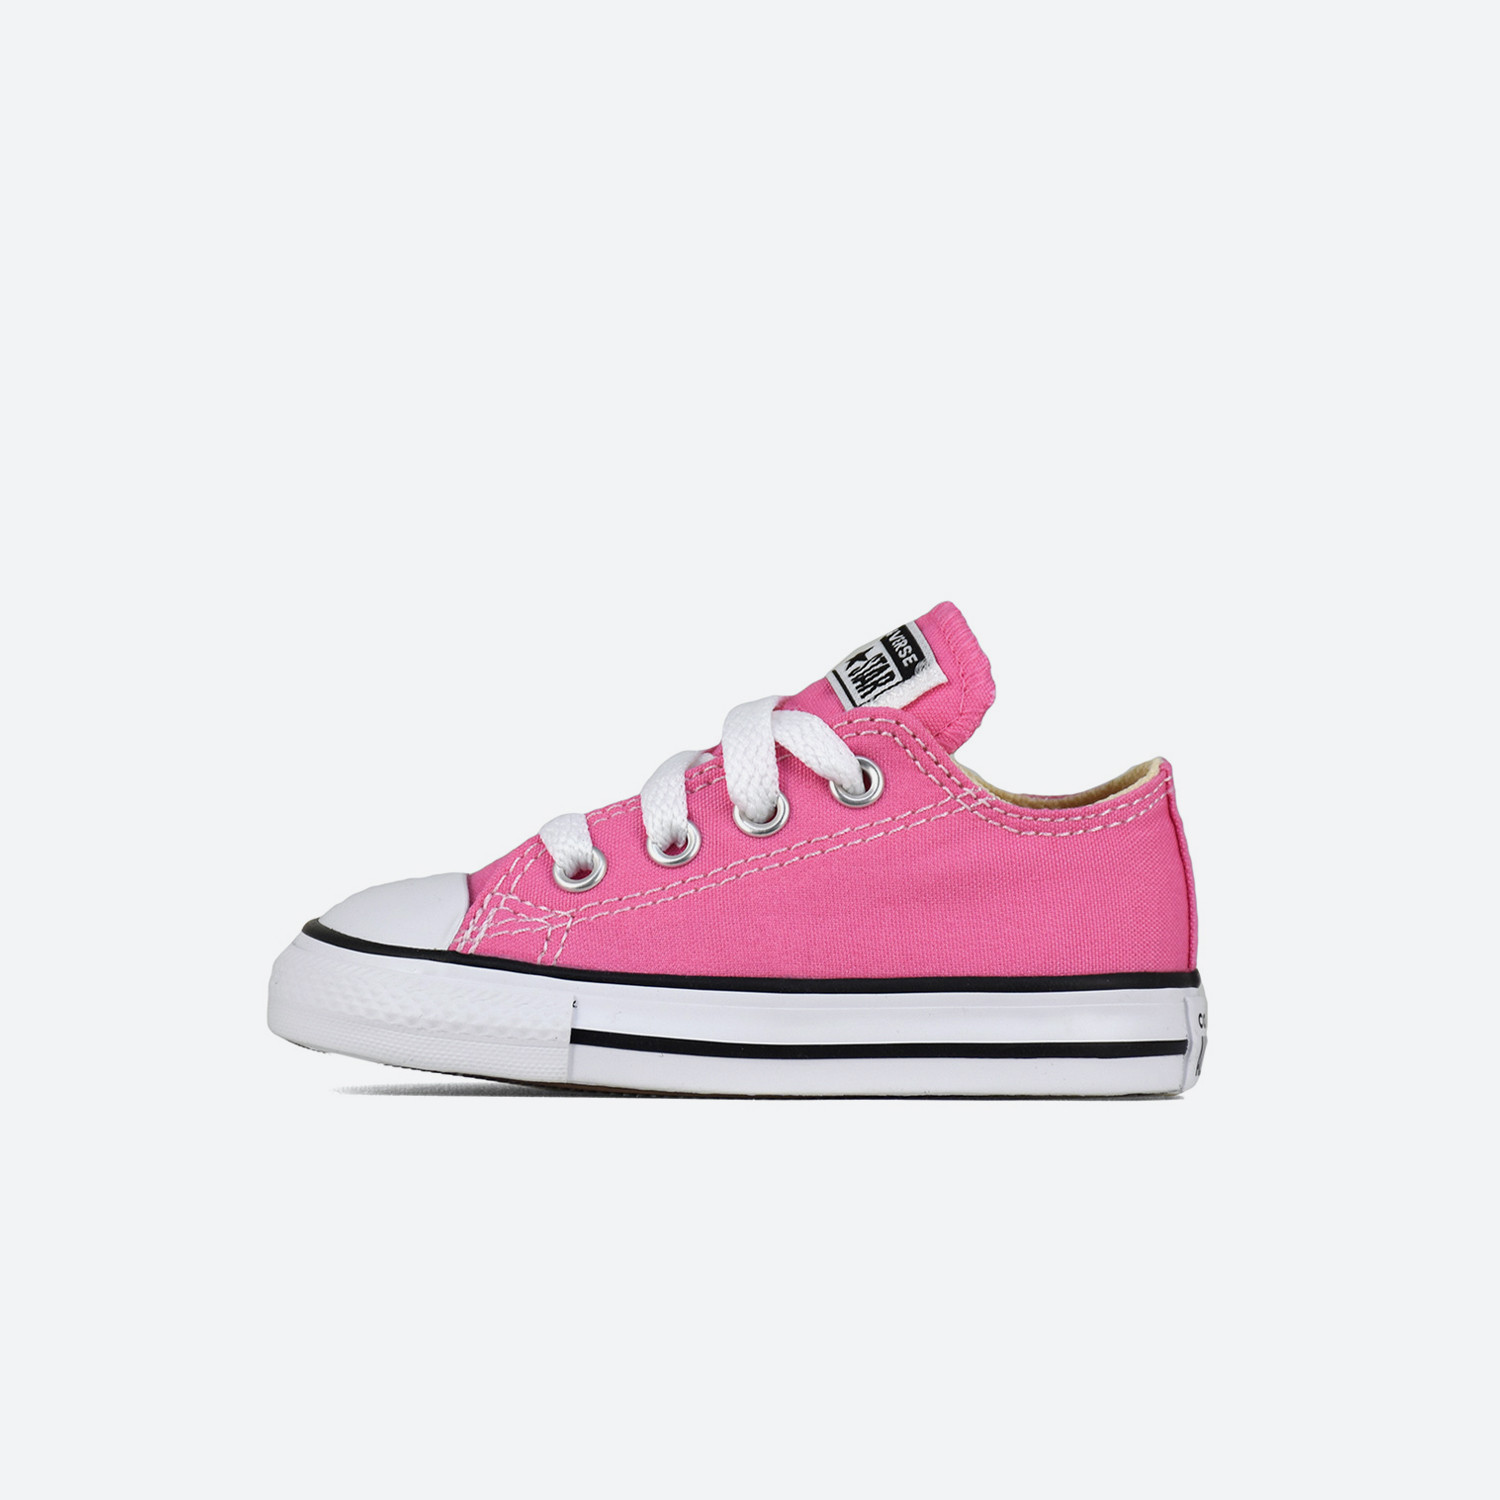 Converse Chuck Taylor All Star Βρεφικά Παπούτσια (1080040698_010)